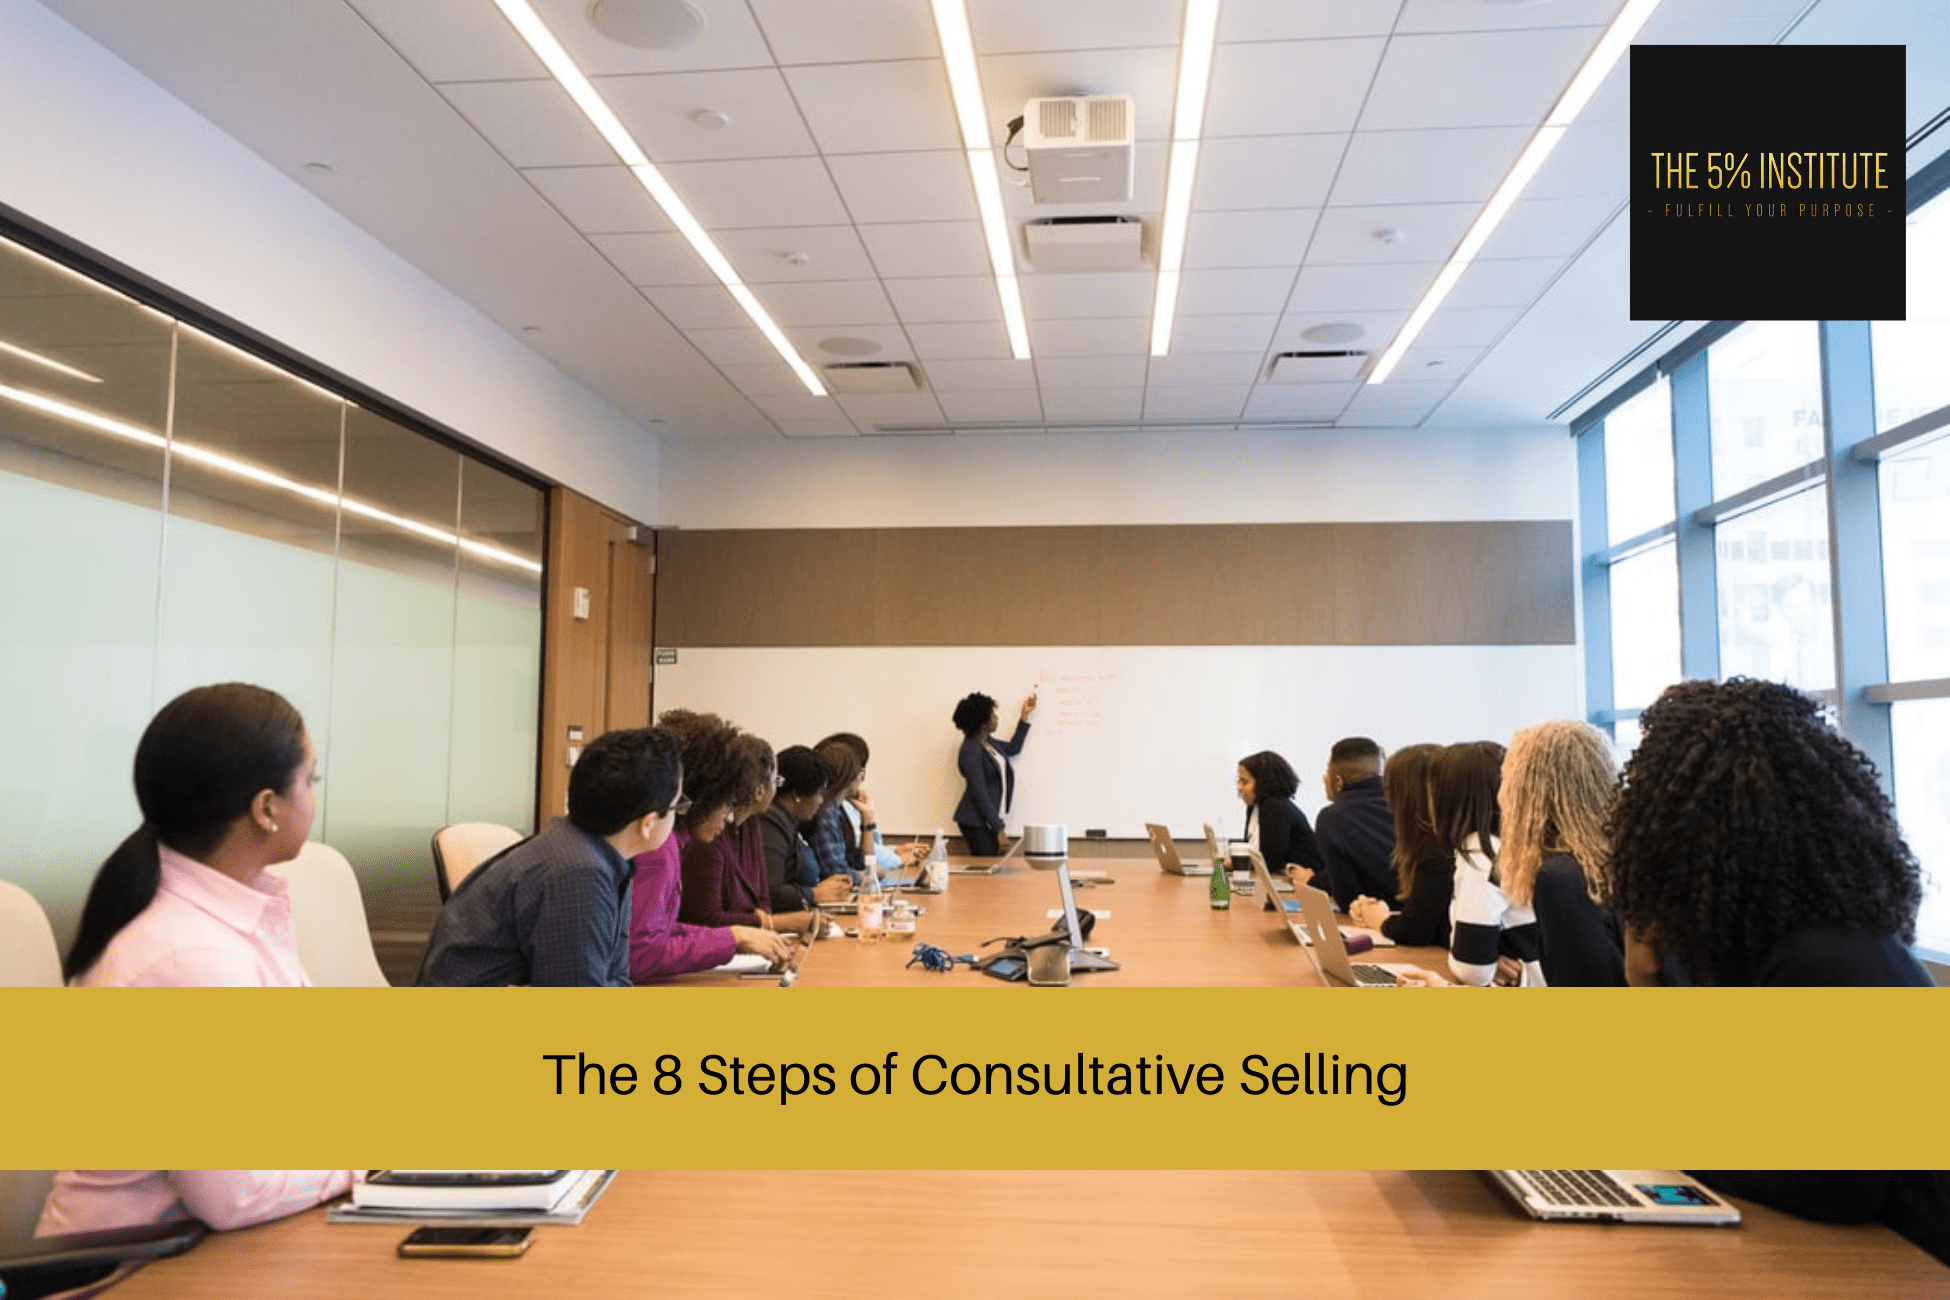 The 8 Steps of Consultative Selling